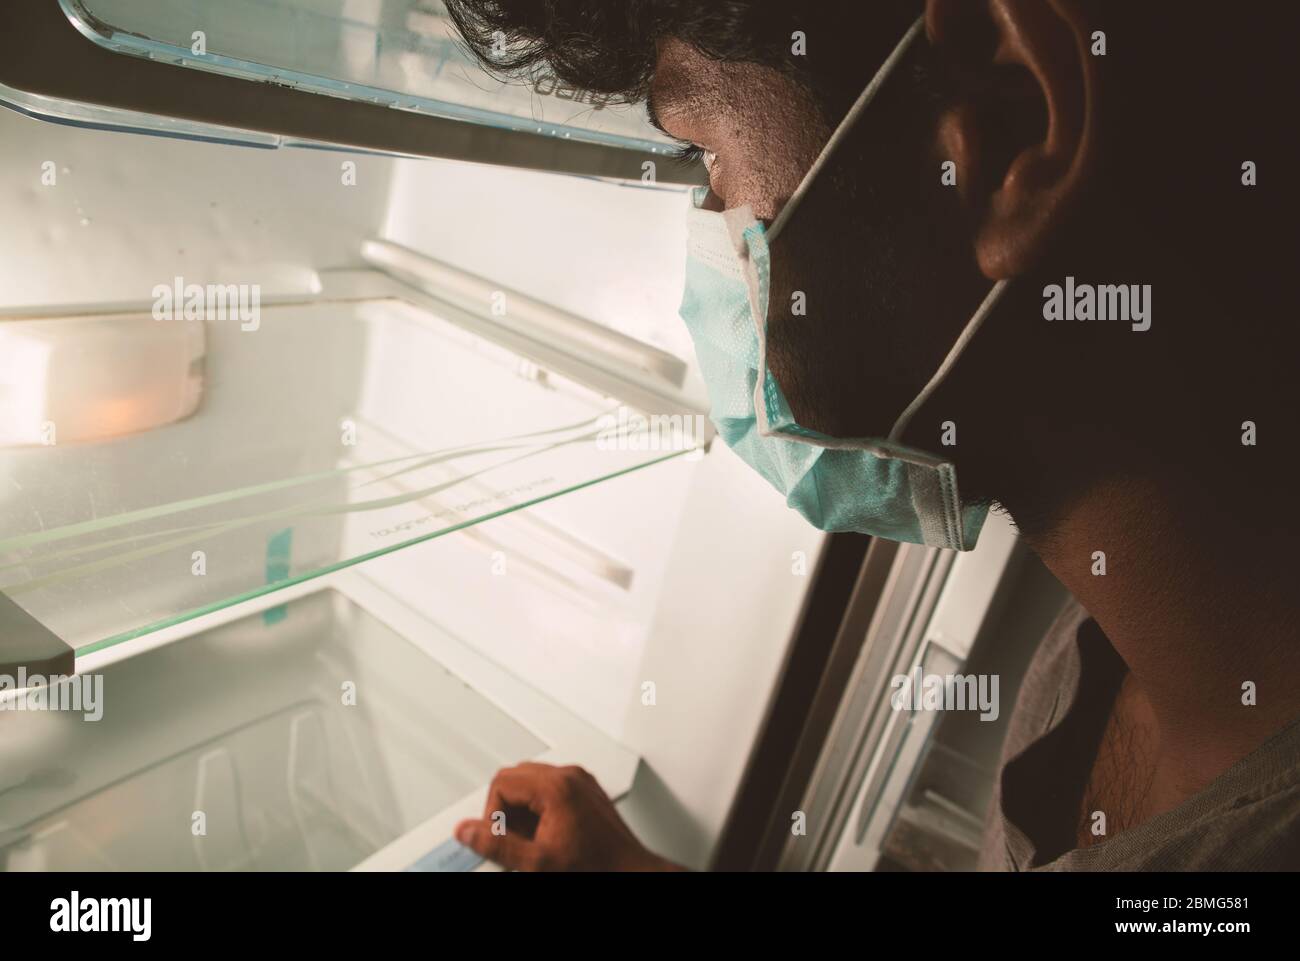 Concept of nofood available during home quarantine at covid-19 or coronavirus pandemic - Man in medical mask looking into empty fridge or refrigerator Stock Photo